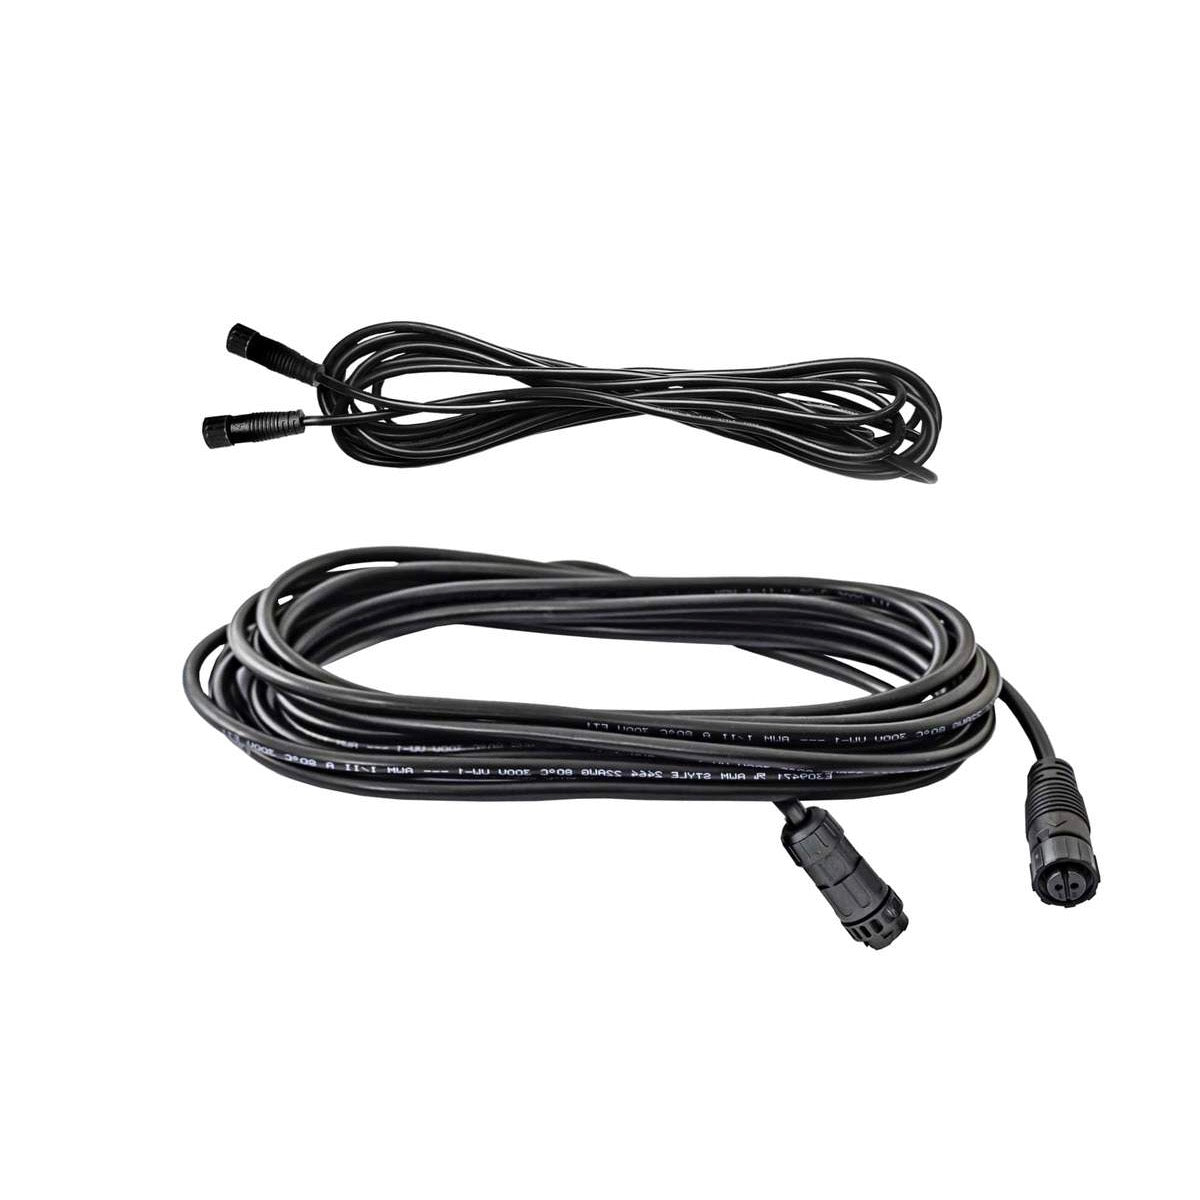 Product Image:PhotonTek LED Driver + Dimming 5m Extension Cables (x2)